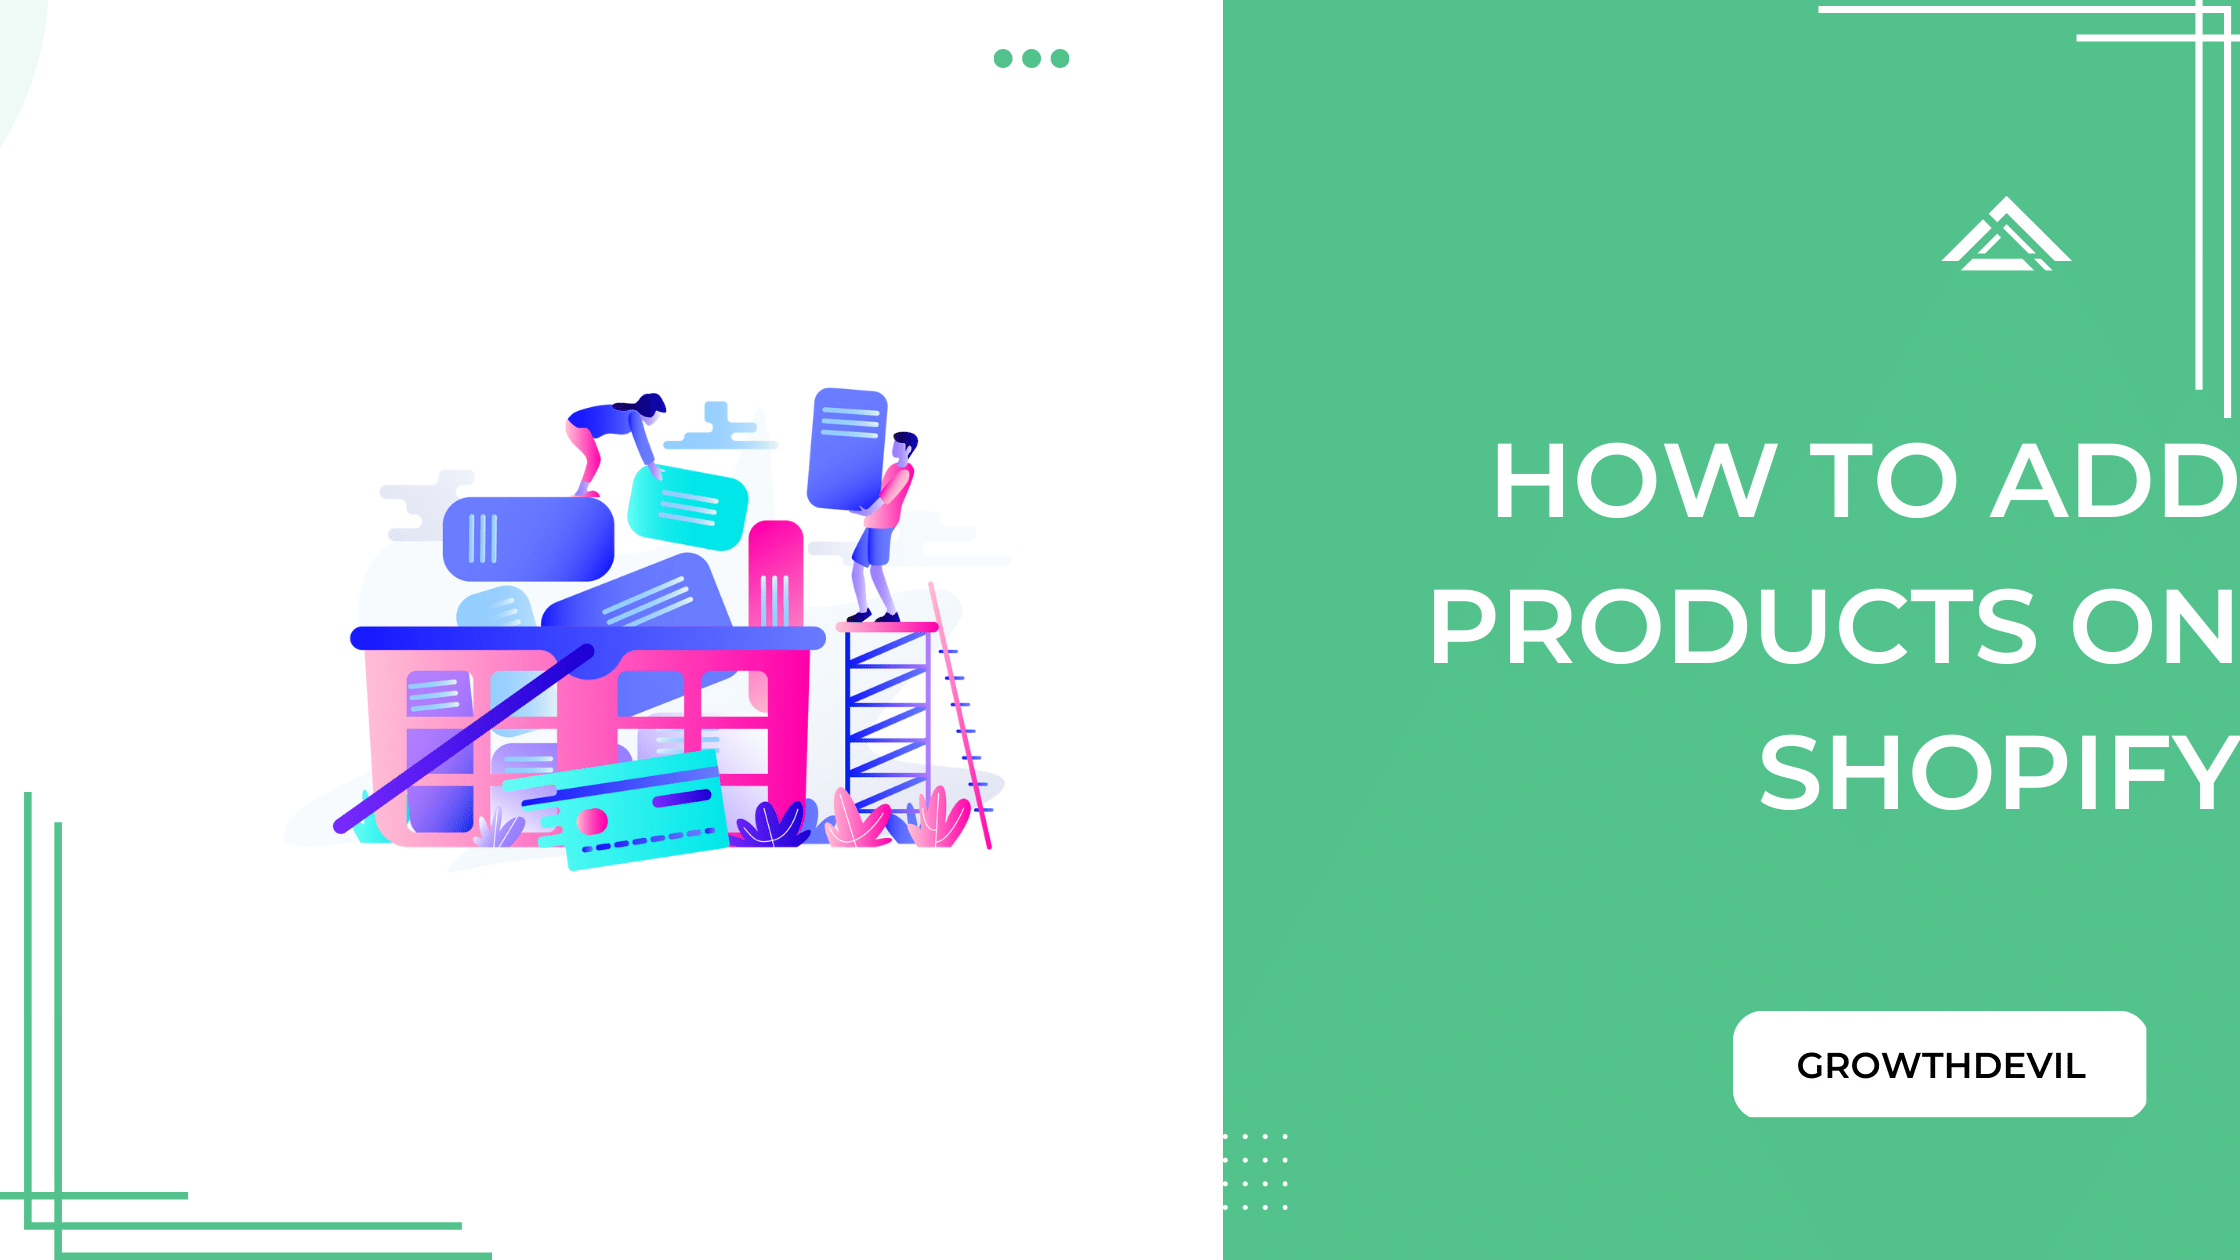 How To Add Products On Shopify - GrowthDevil